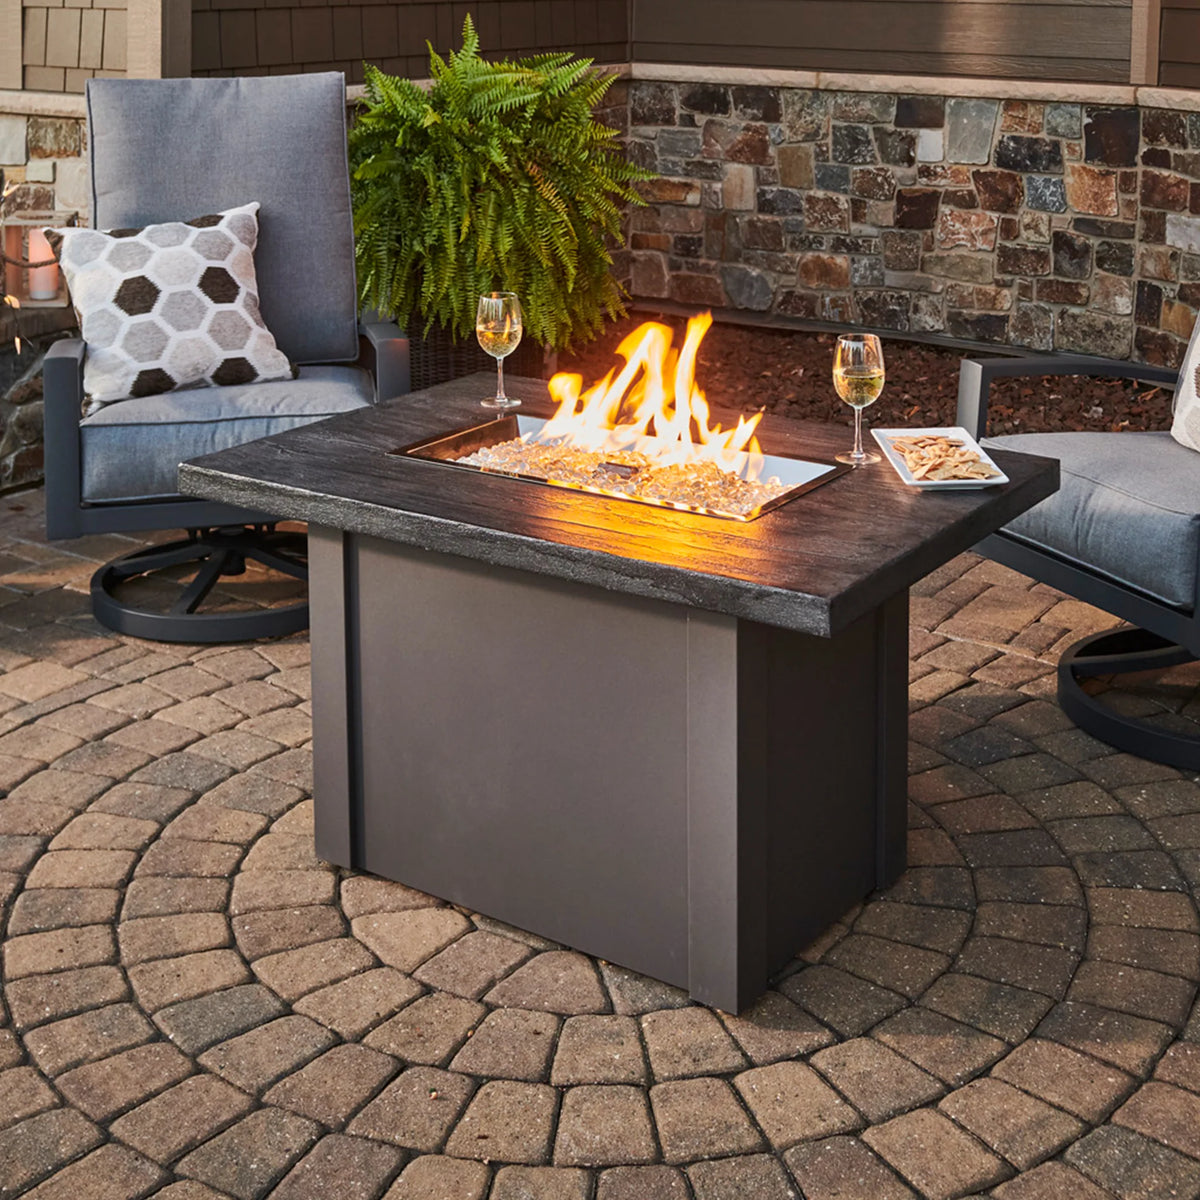 Outdoor GreatRoom Company Stone Grey Havenwood Rectangular Gas Fire Pit Table